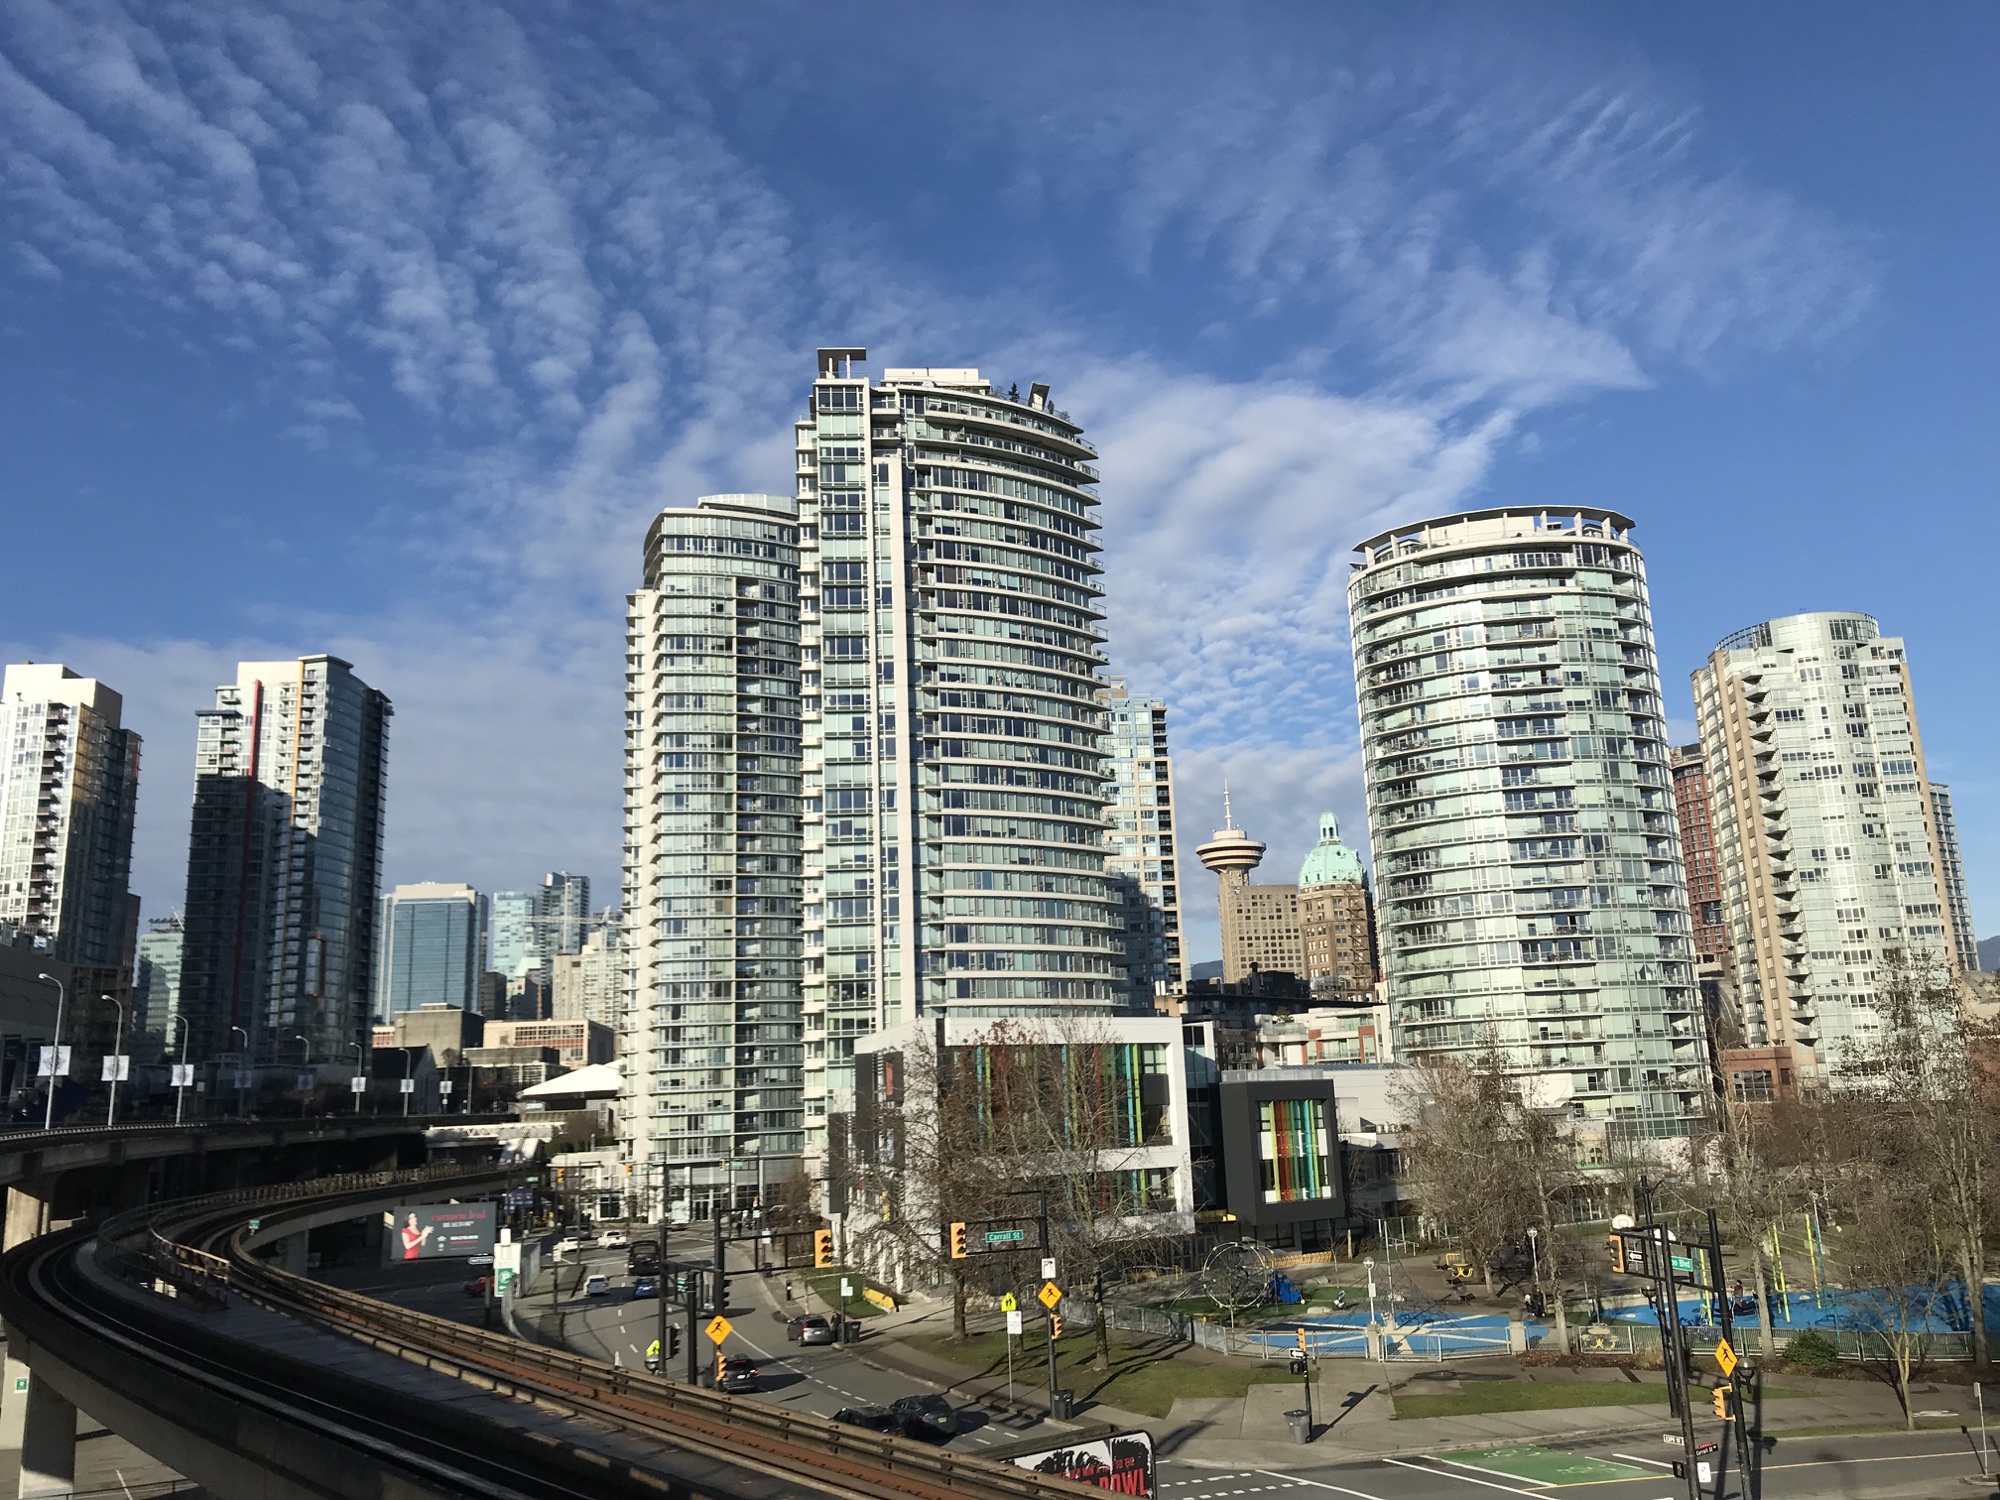 Vancouver on a sunny day